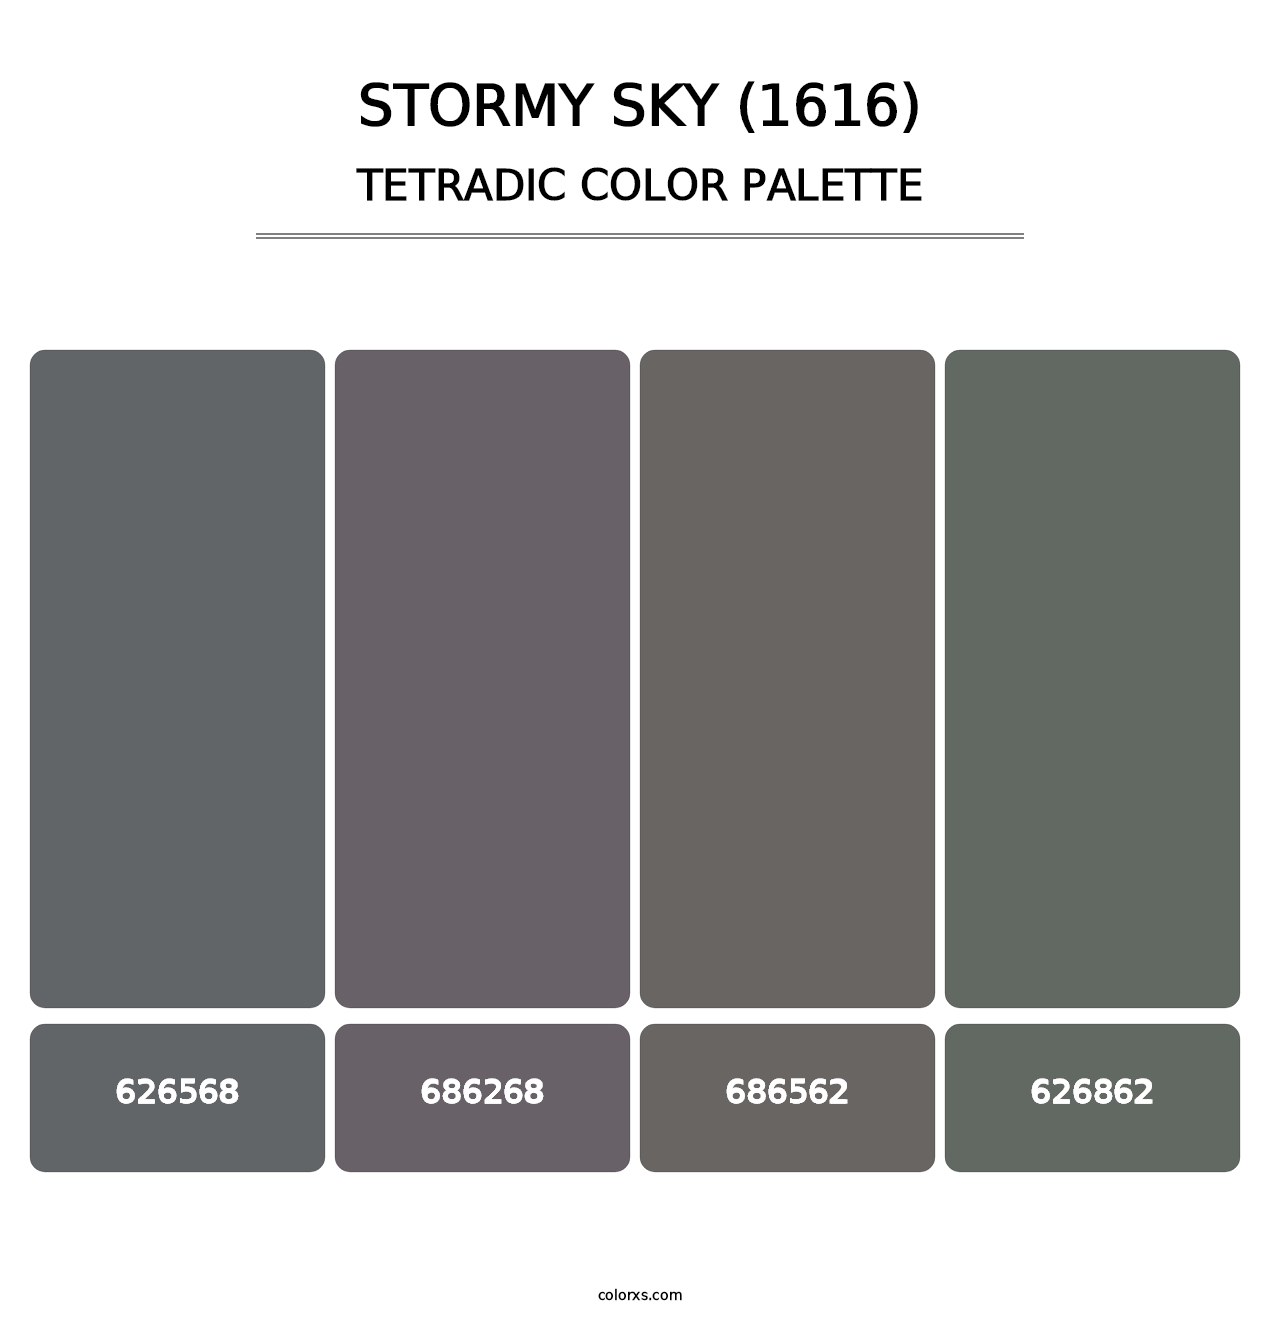 Stormy Sky (1616) - Tetradic Color Palette